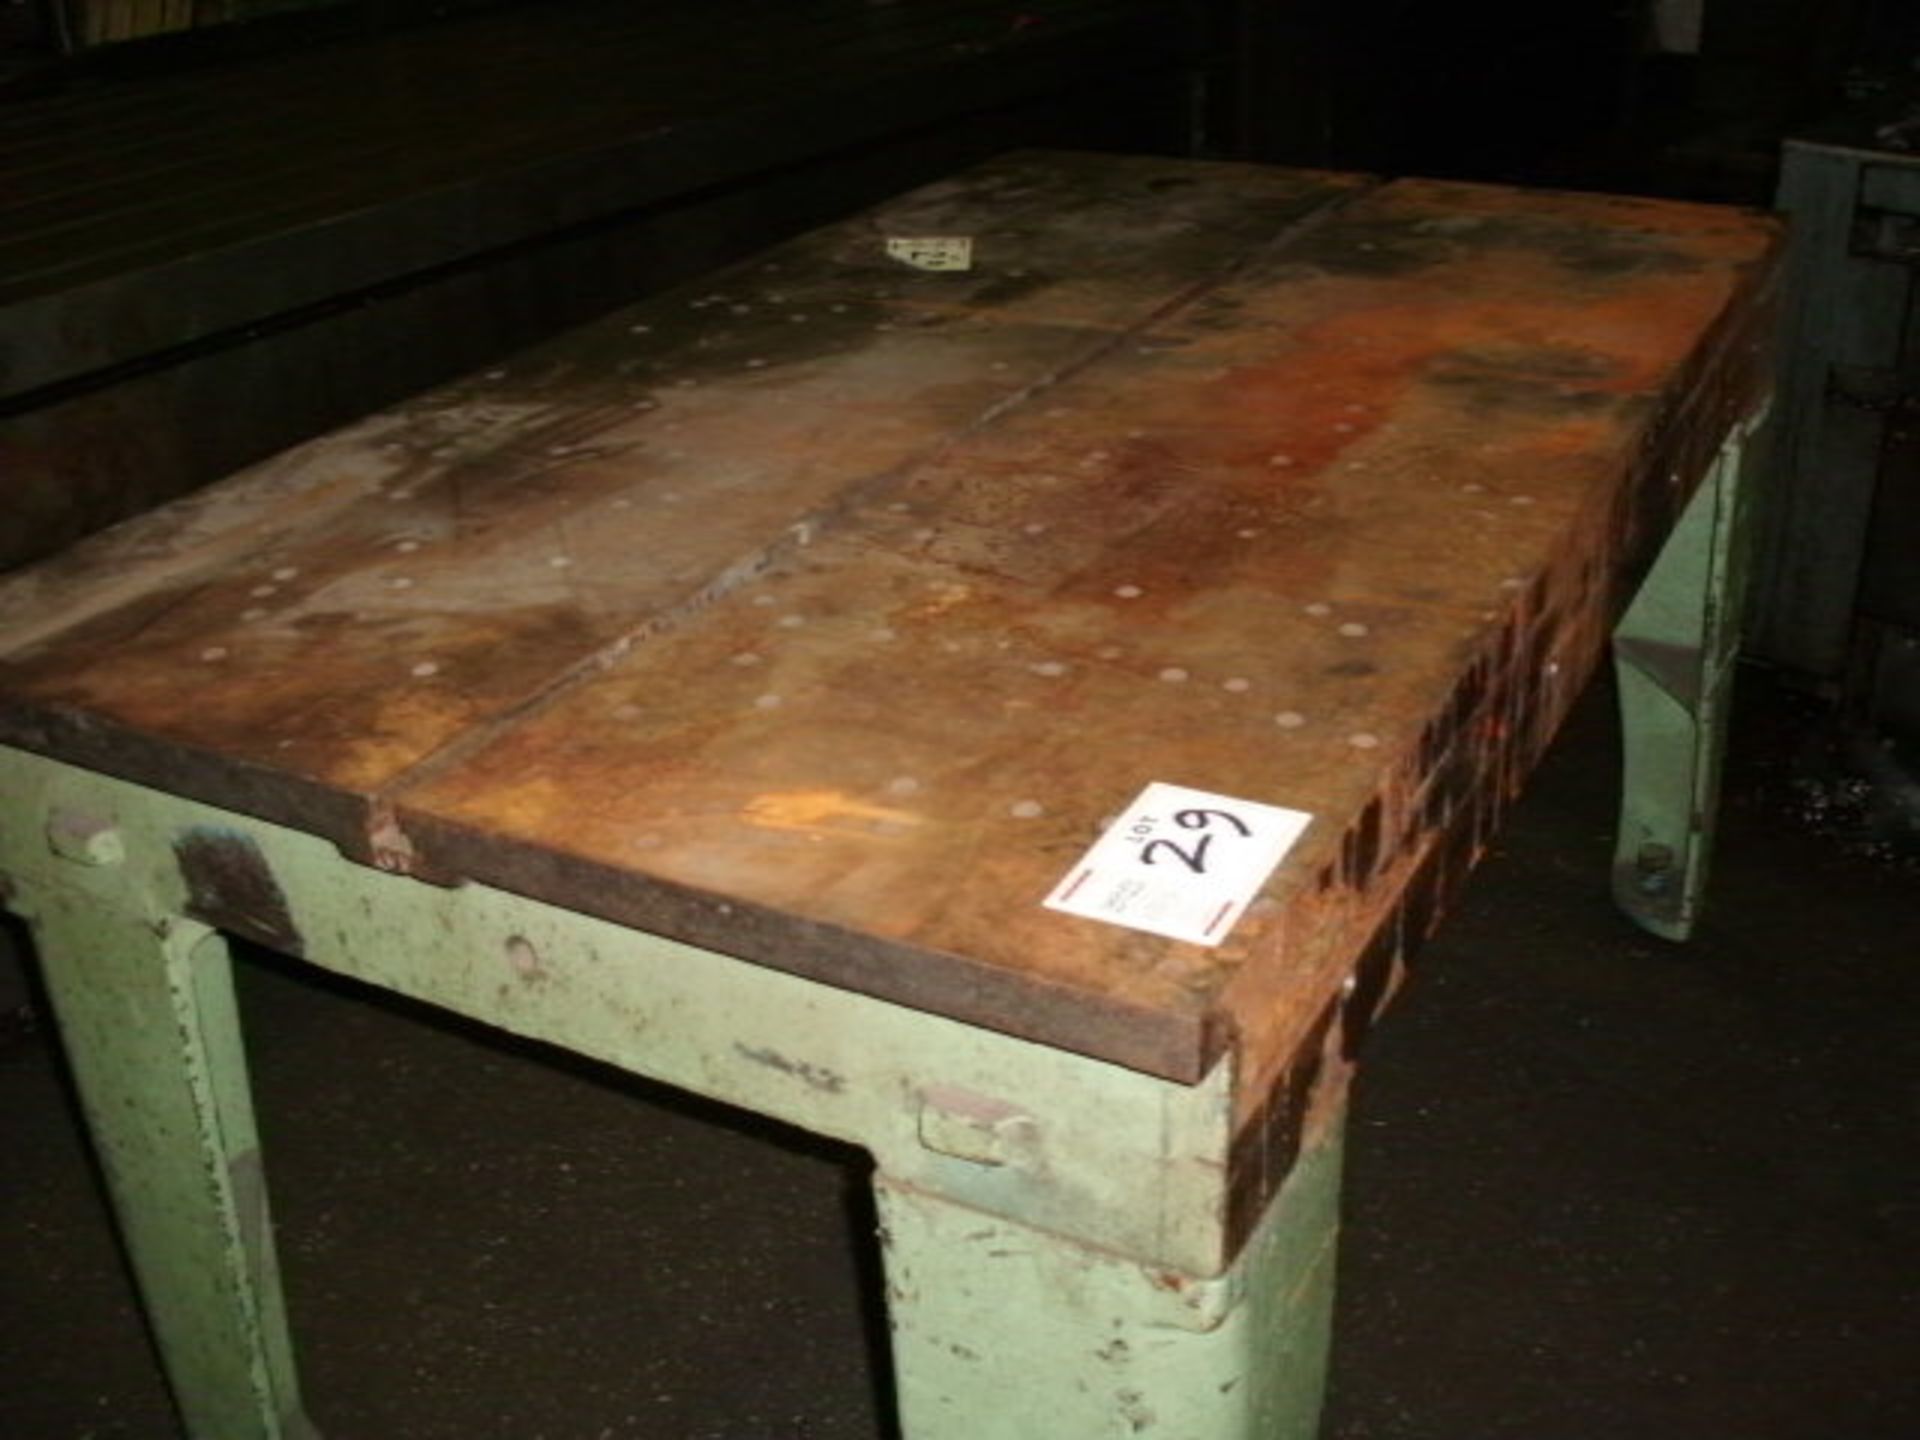 Cast steel TABLE 35" x 60" - Image 2 of 2